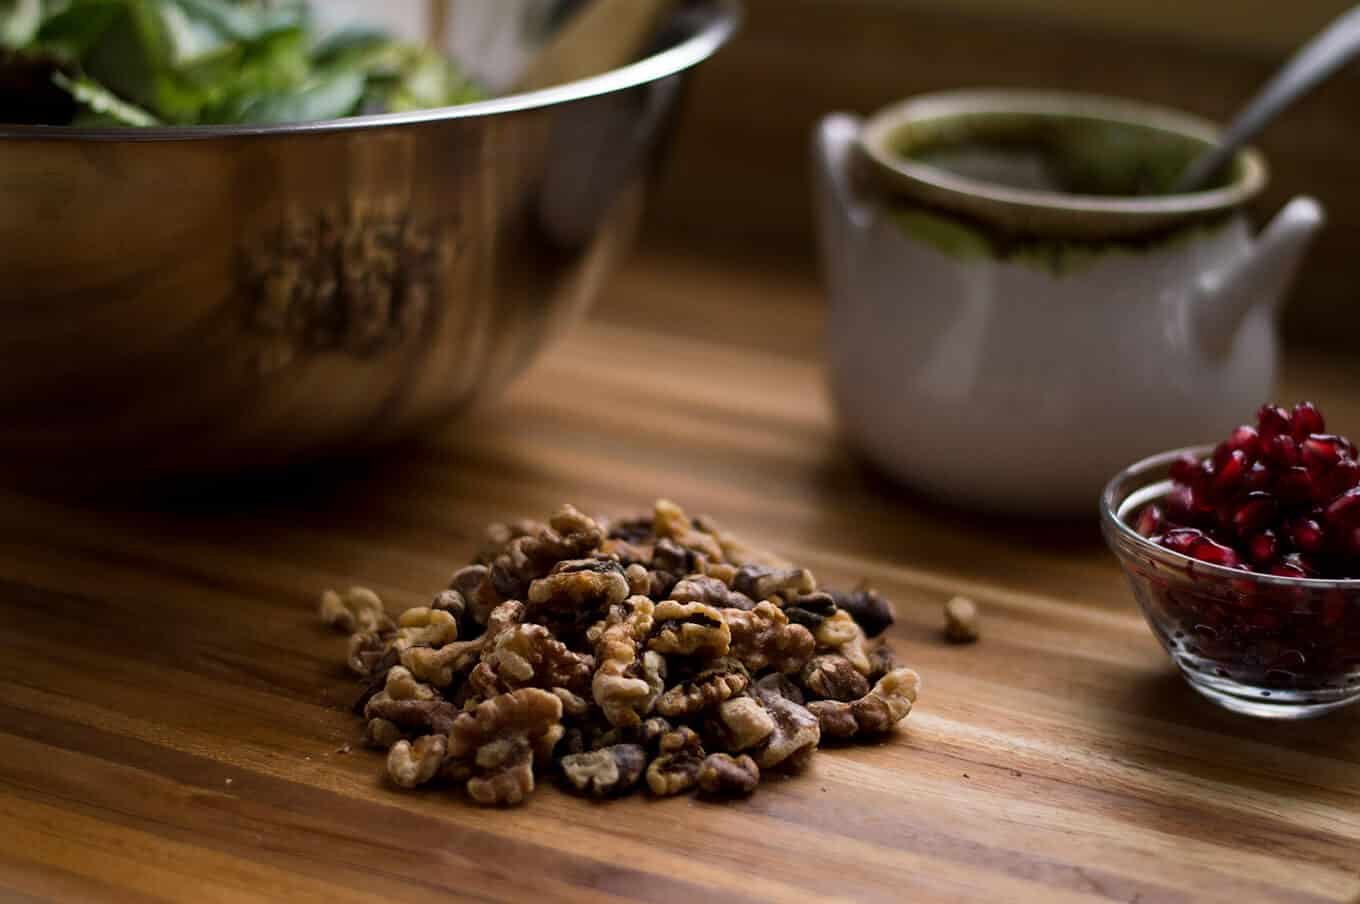 Pecans on a cutting board with bowls in the background.